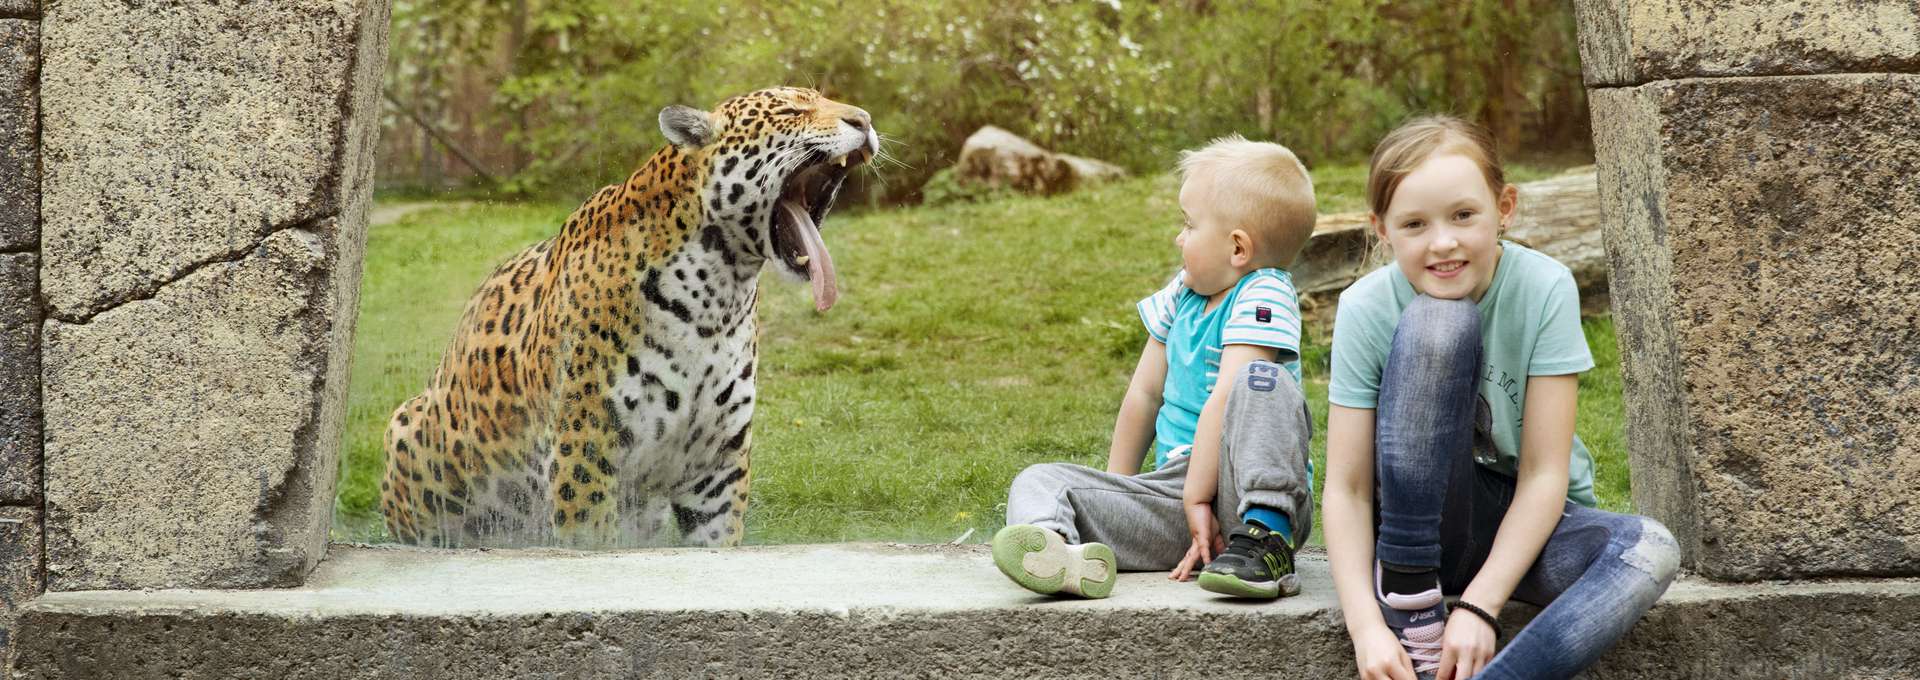 A roaring lepard, and two kids